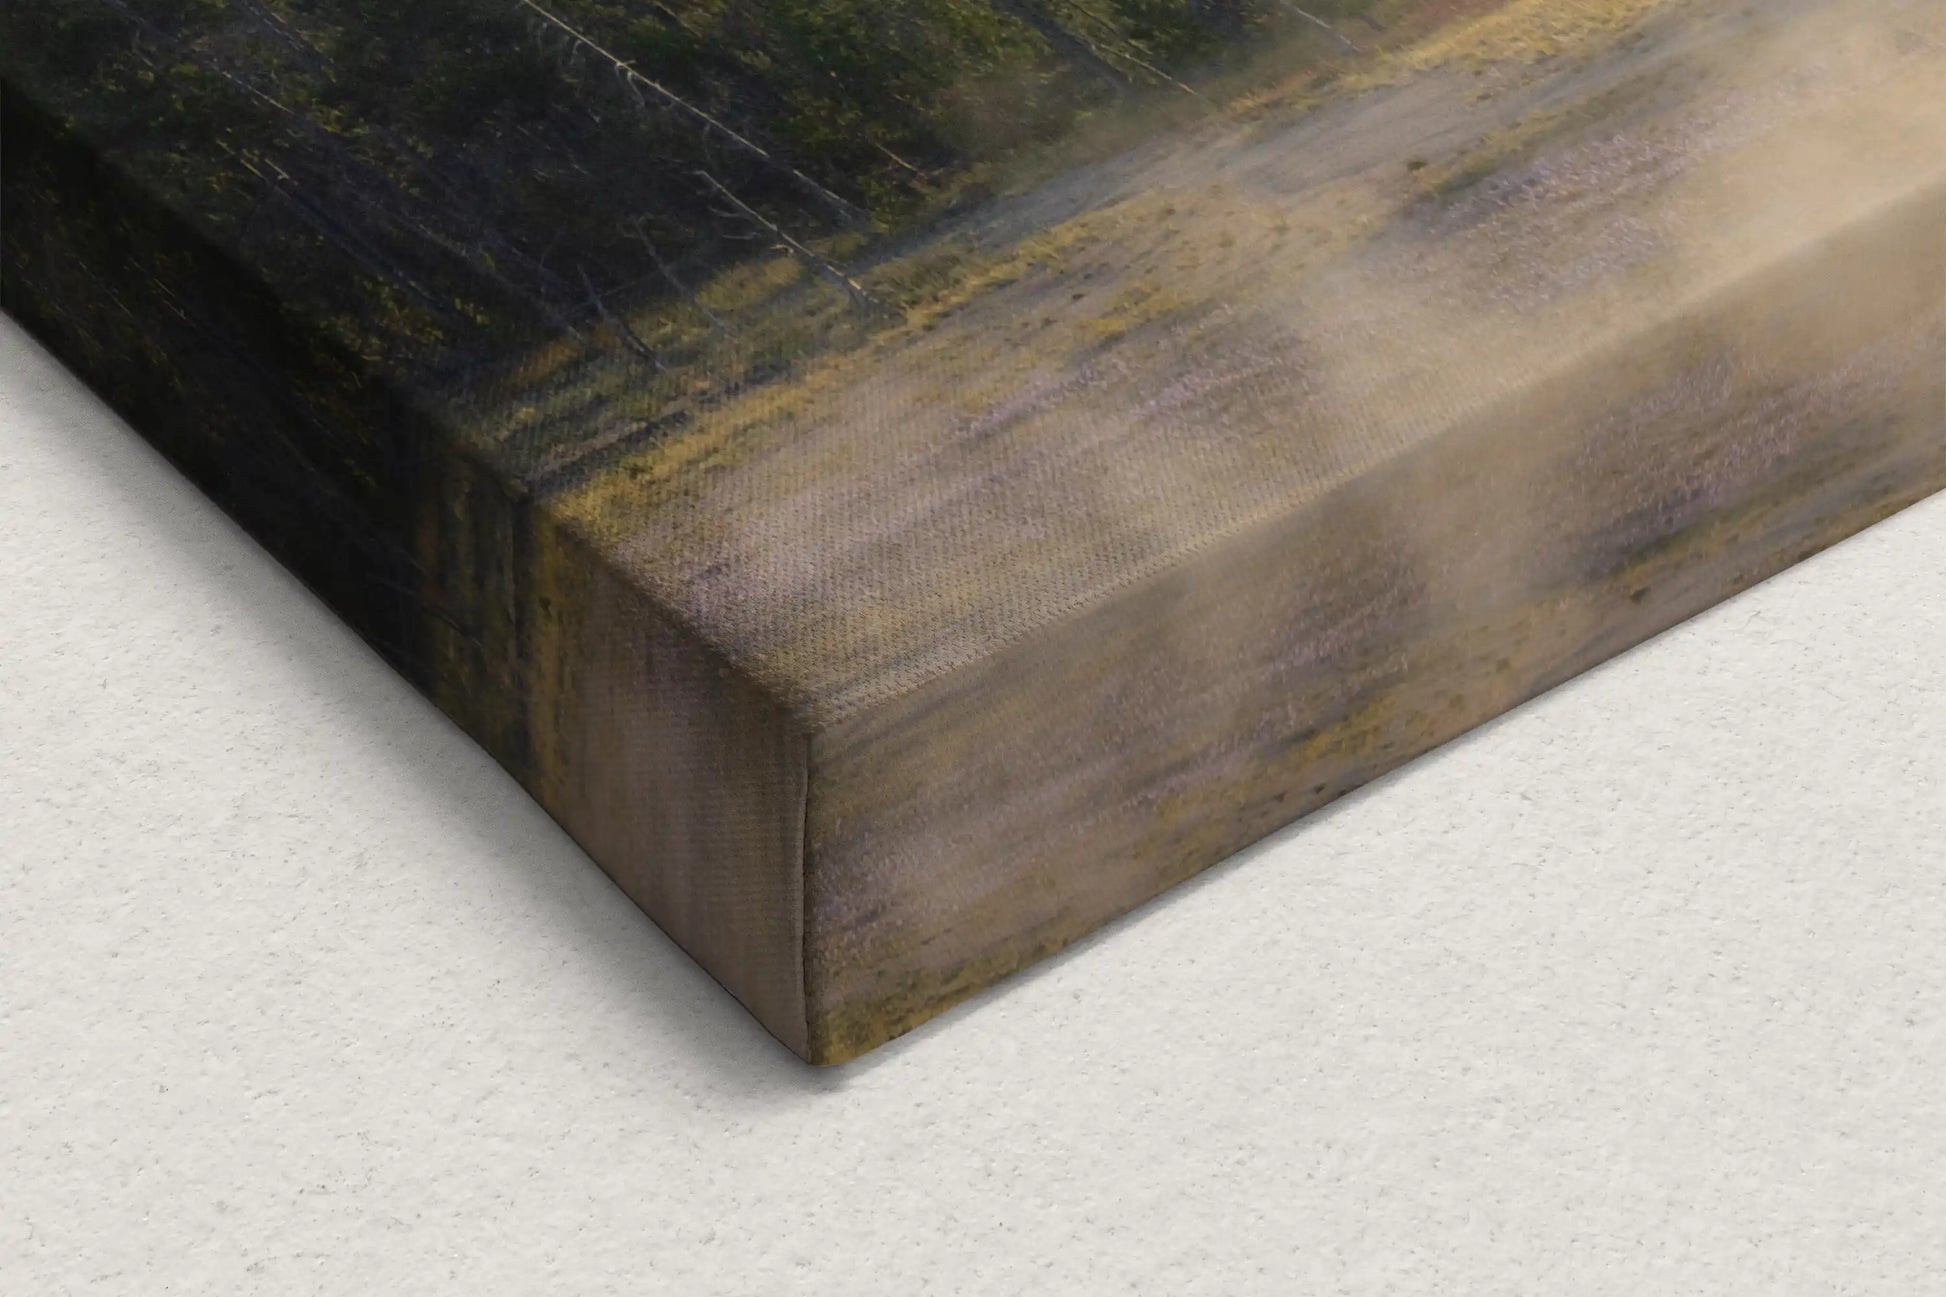 Edge view of a canvas print, with the foggy Yellowstone forest image wrapping around the sides, highlighting depth and continuity.